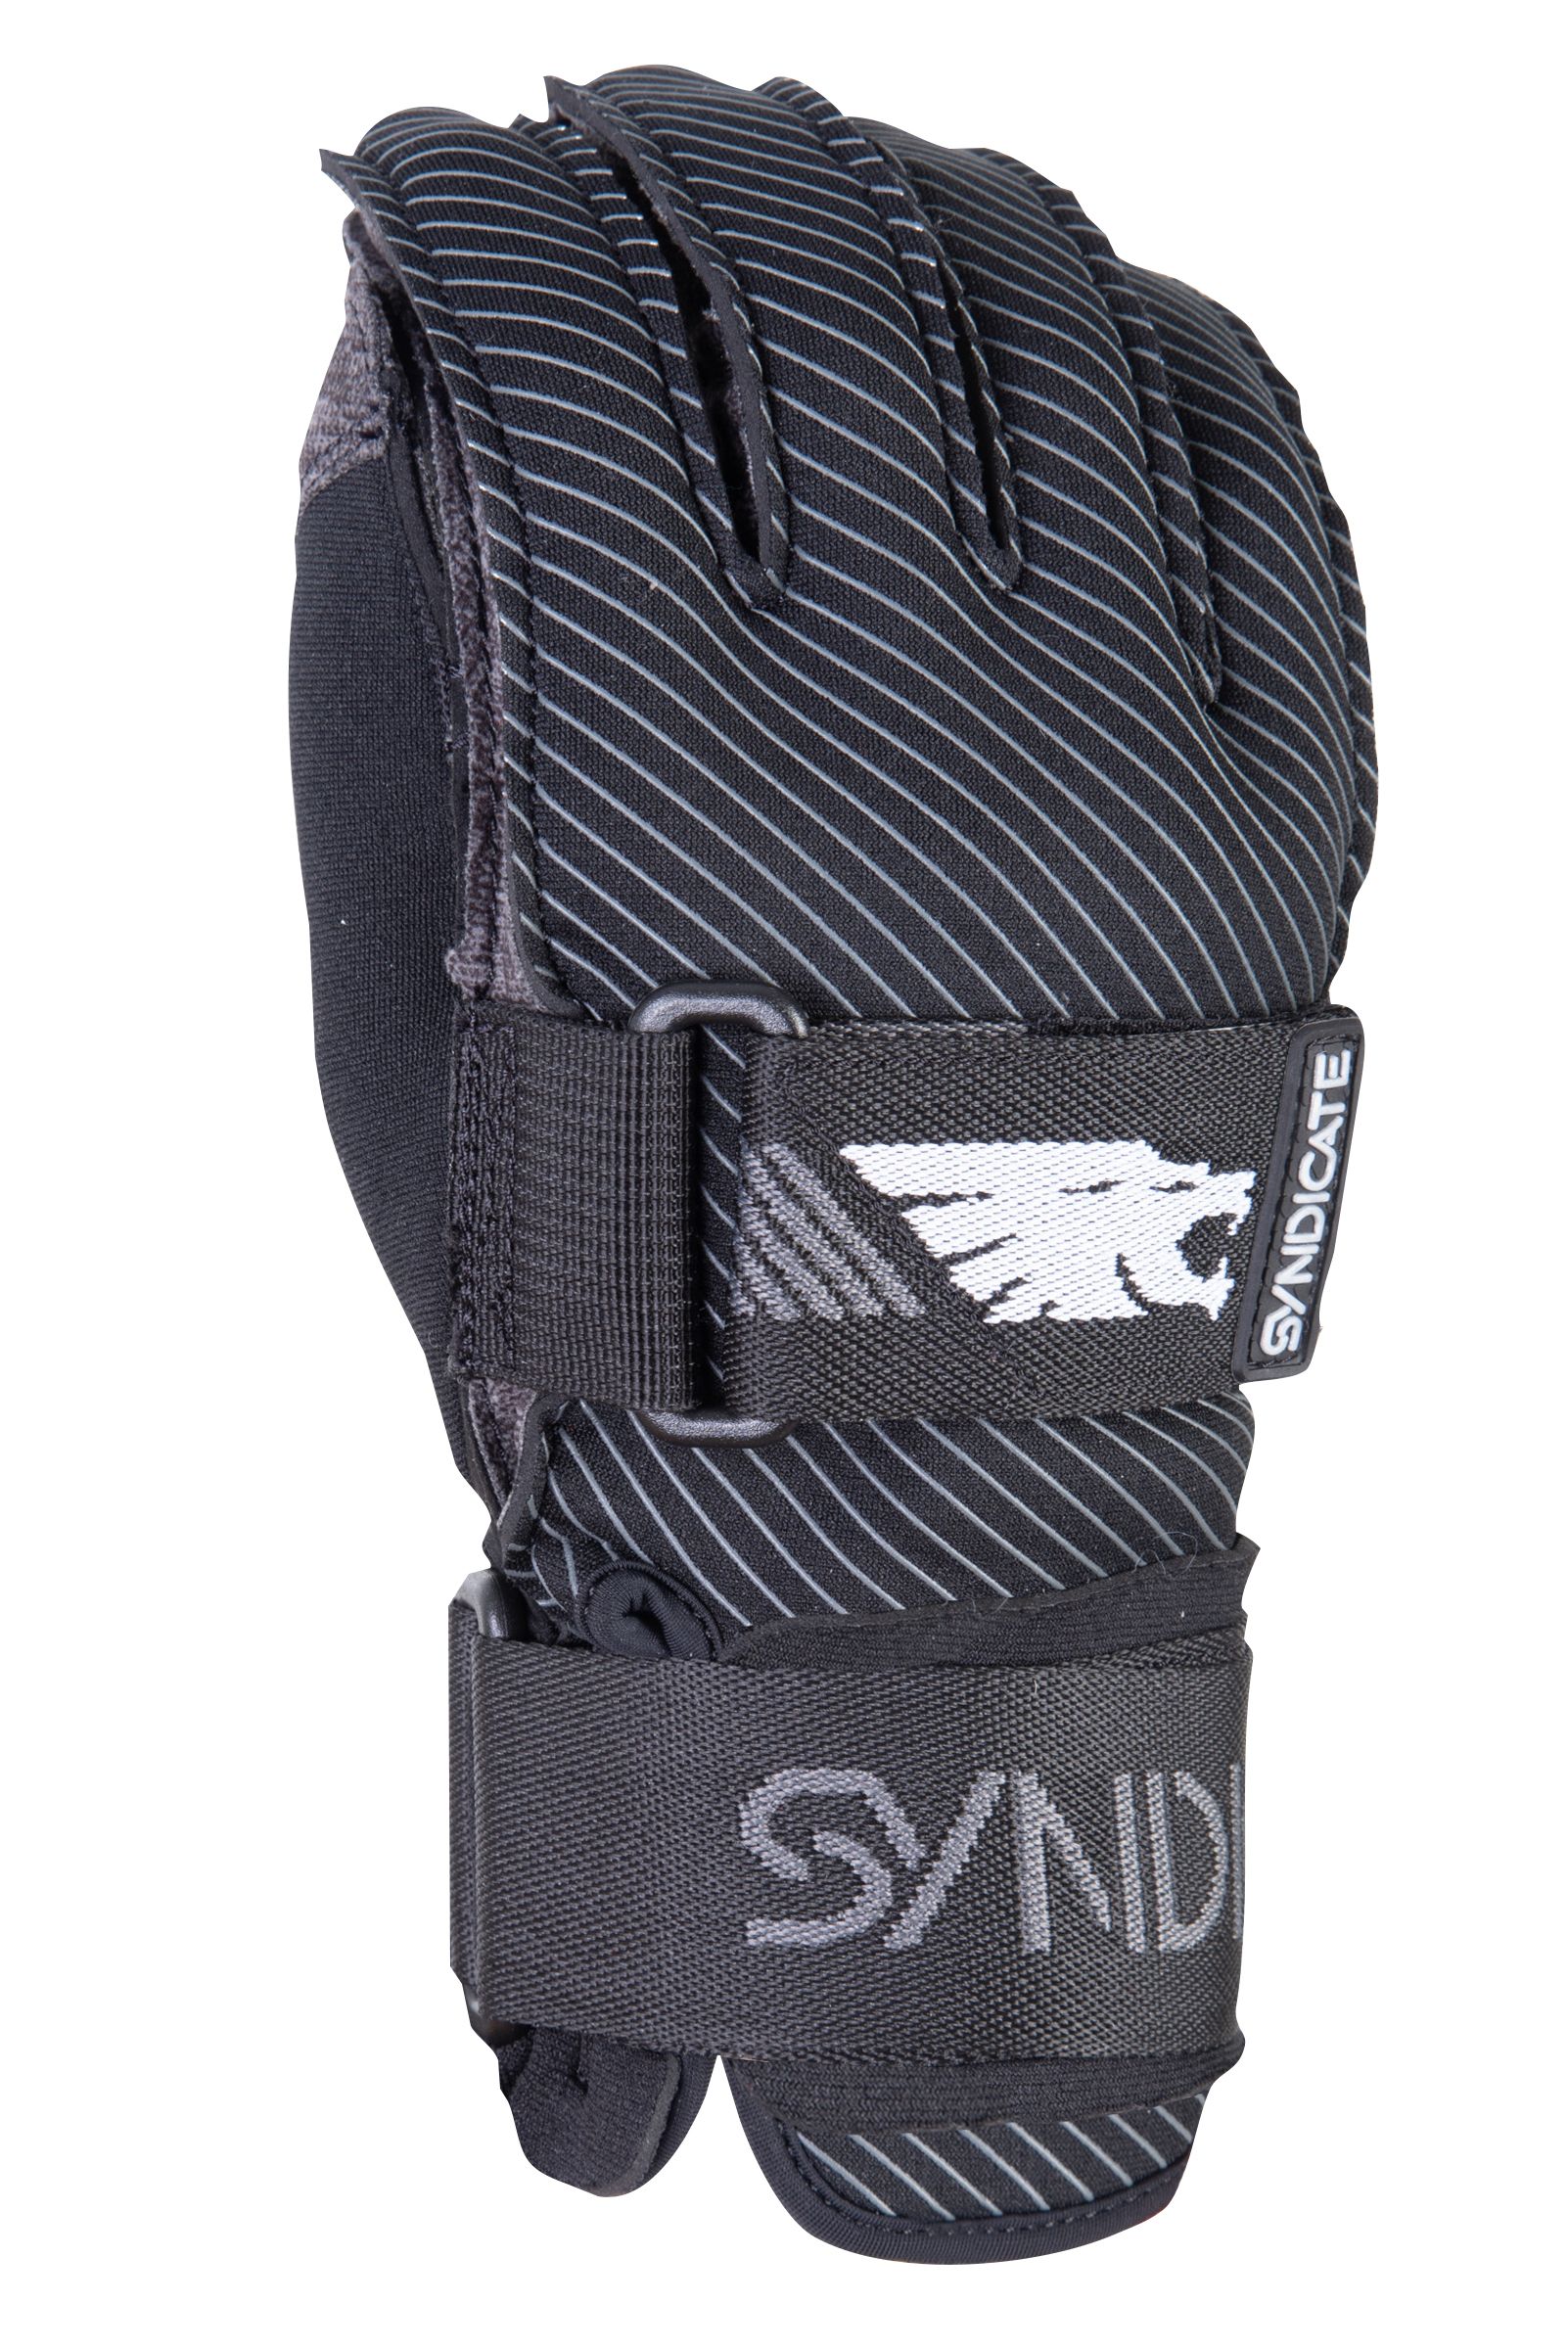 HO SYNDICATE GLOVE 41 TAIL - INSIDE OUT GLOVE